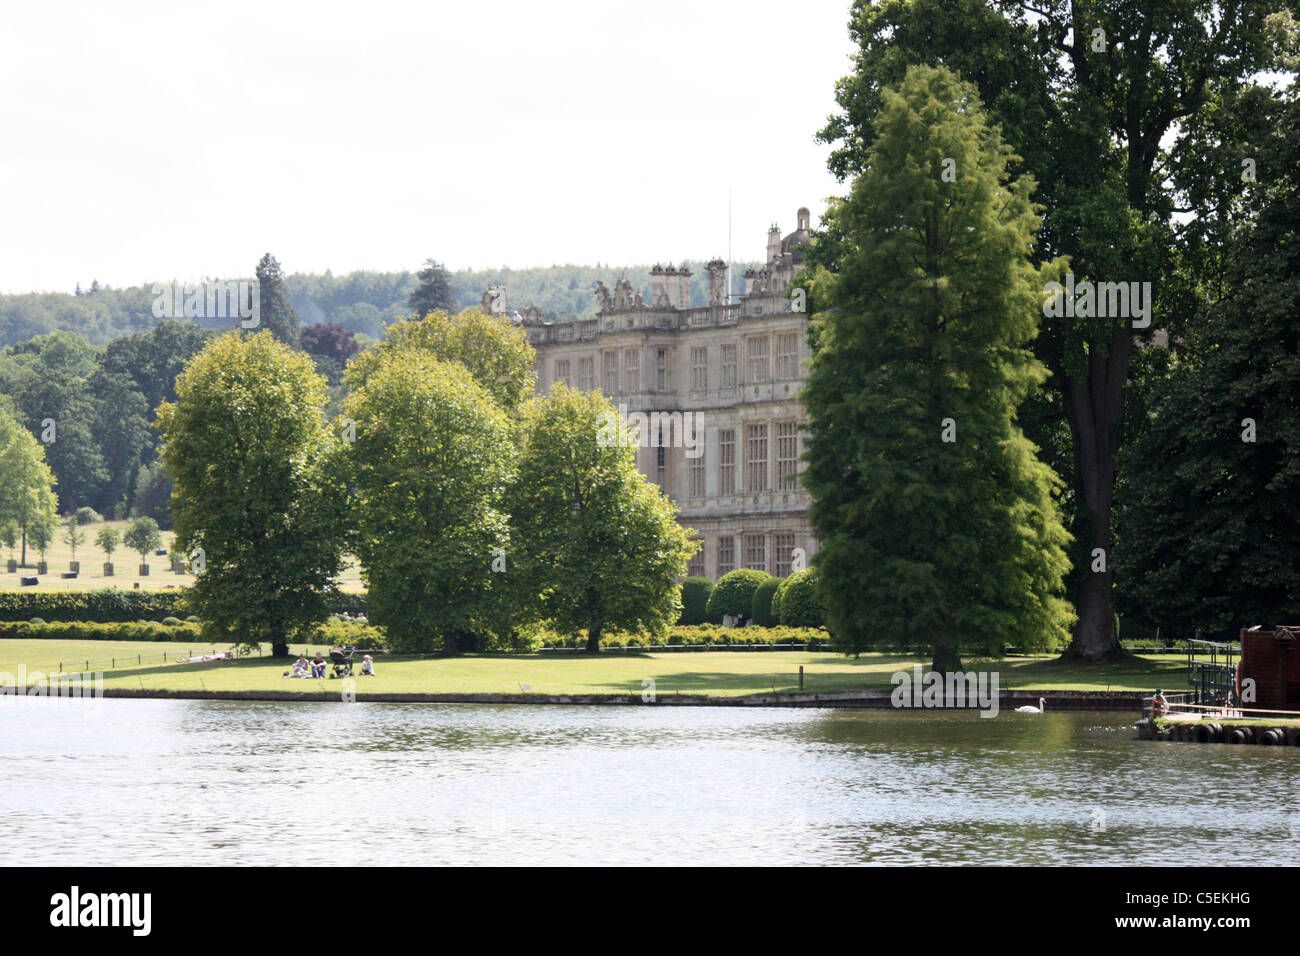 Longleat house and river at Longleat safari and adventure park Stock Photo